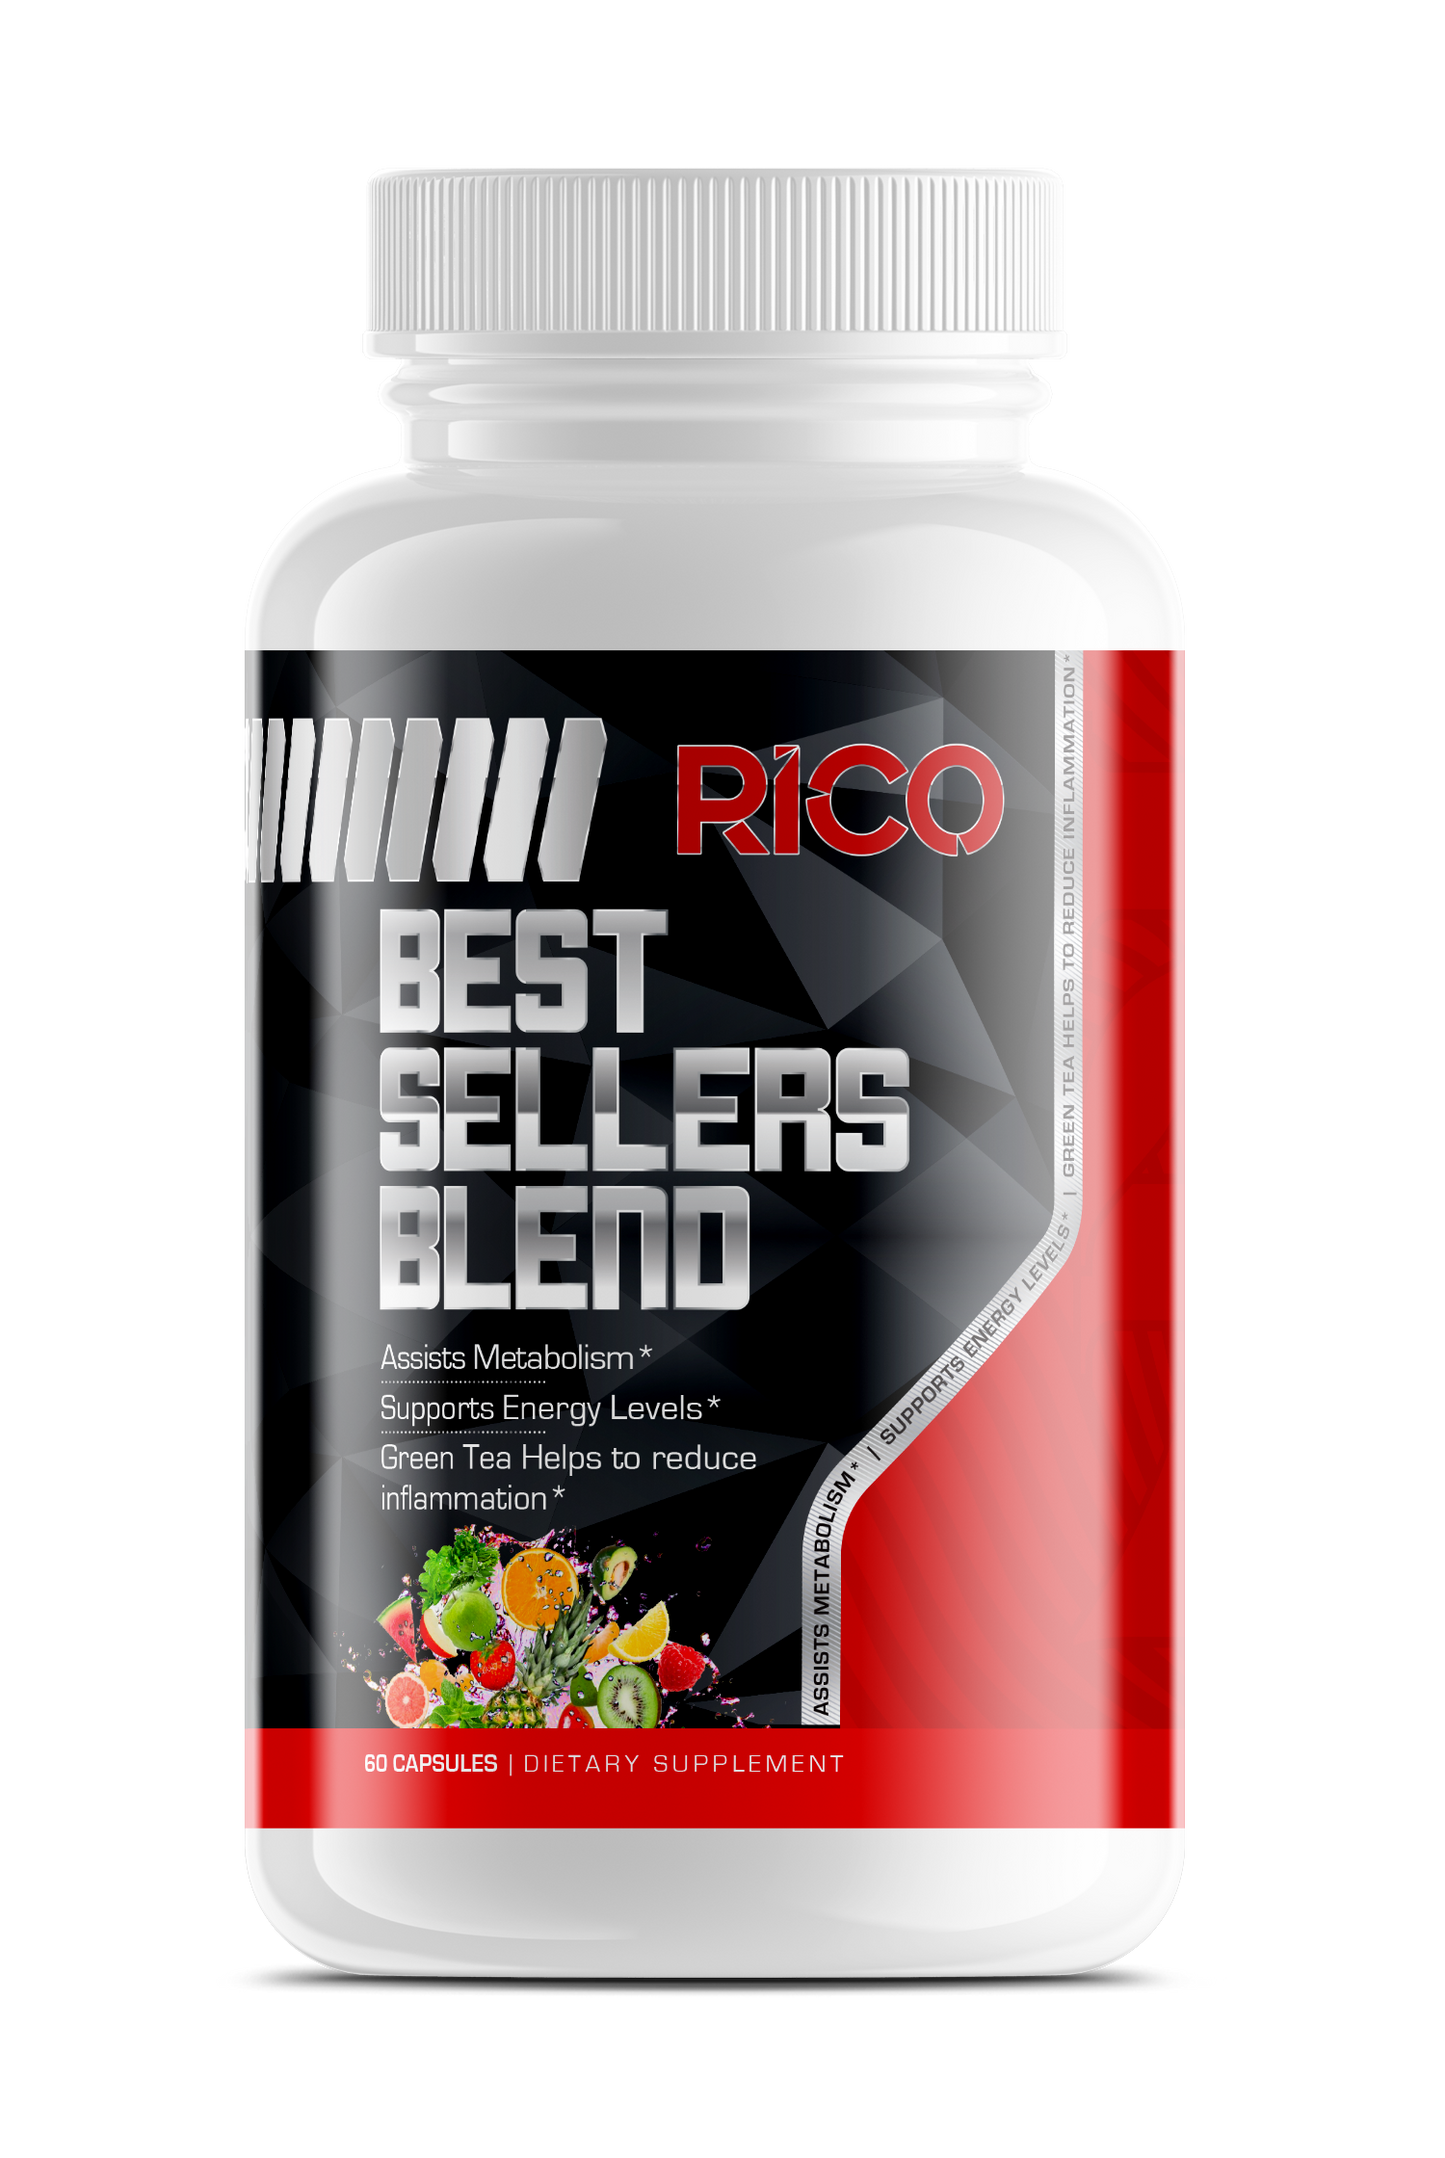 Best Sellers Blend - Rico Goods by Rico Suarez